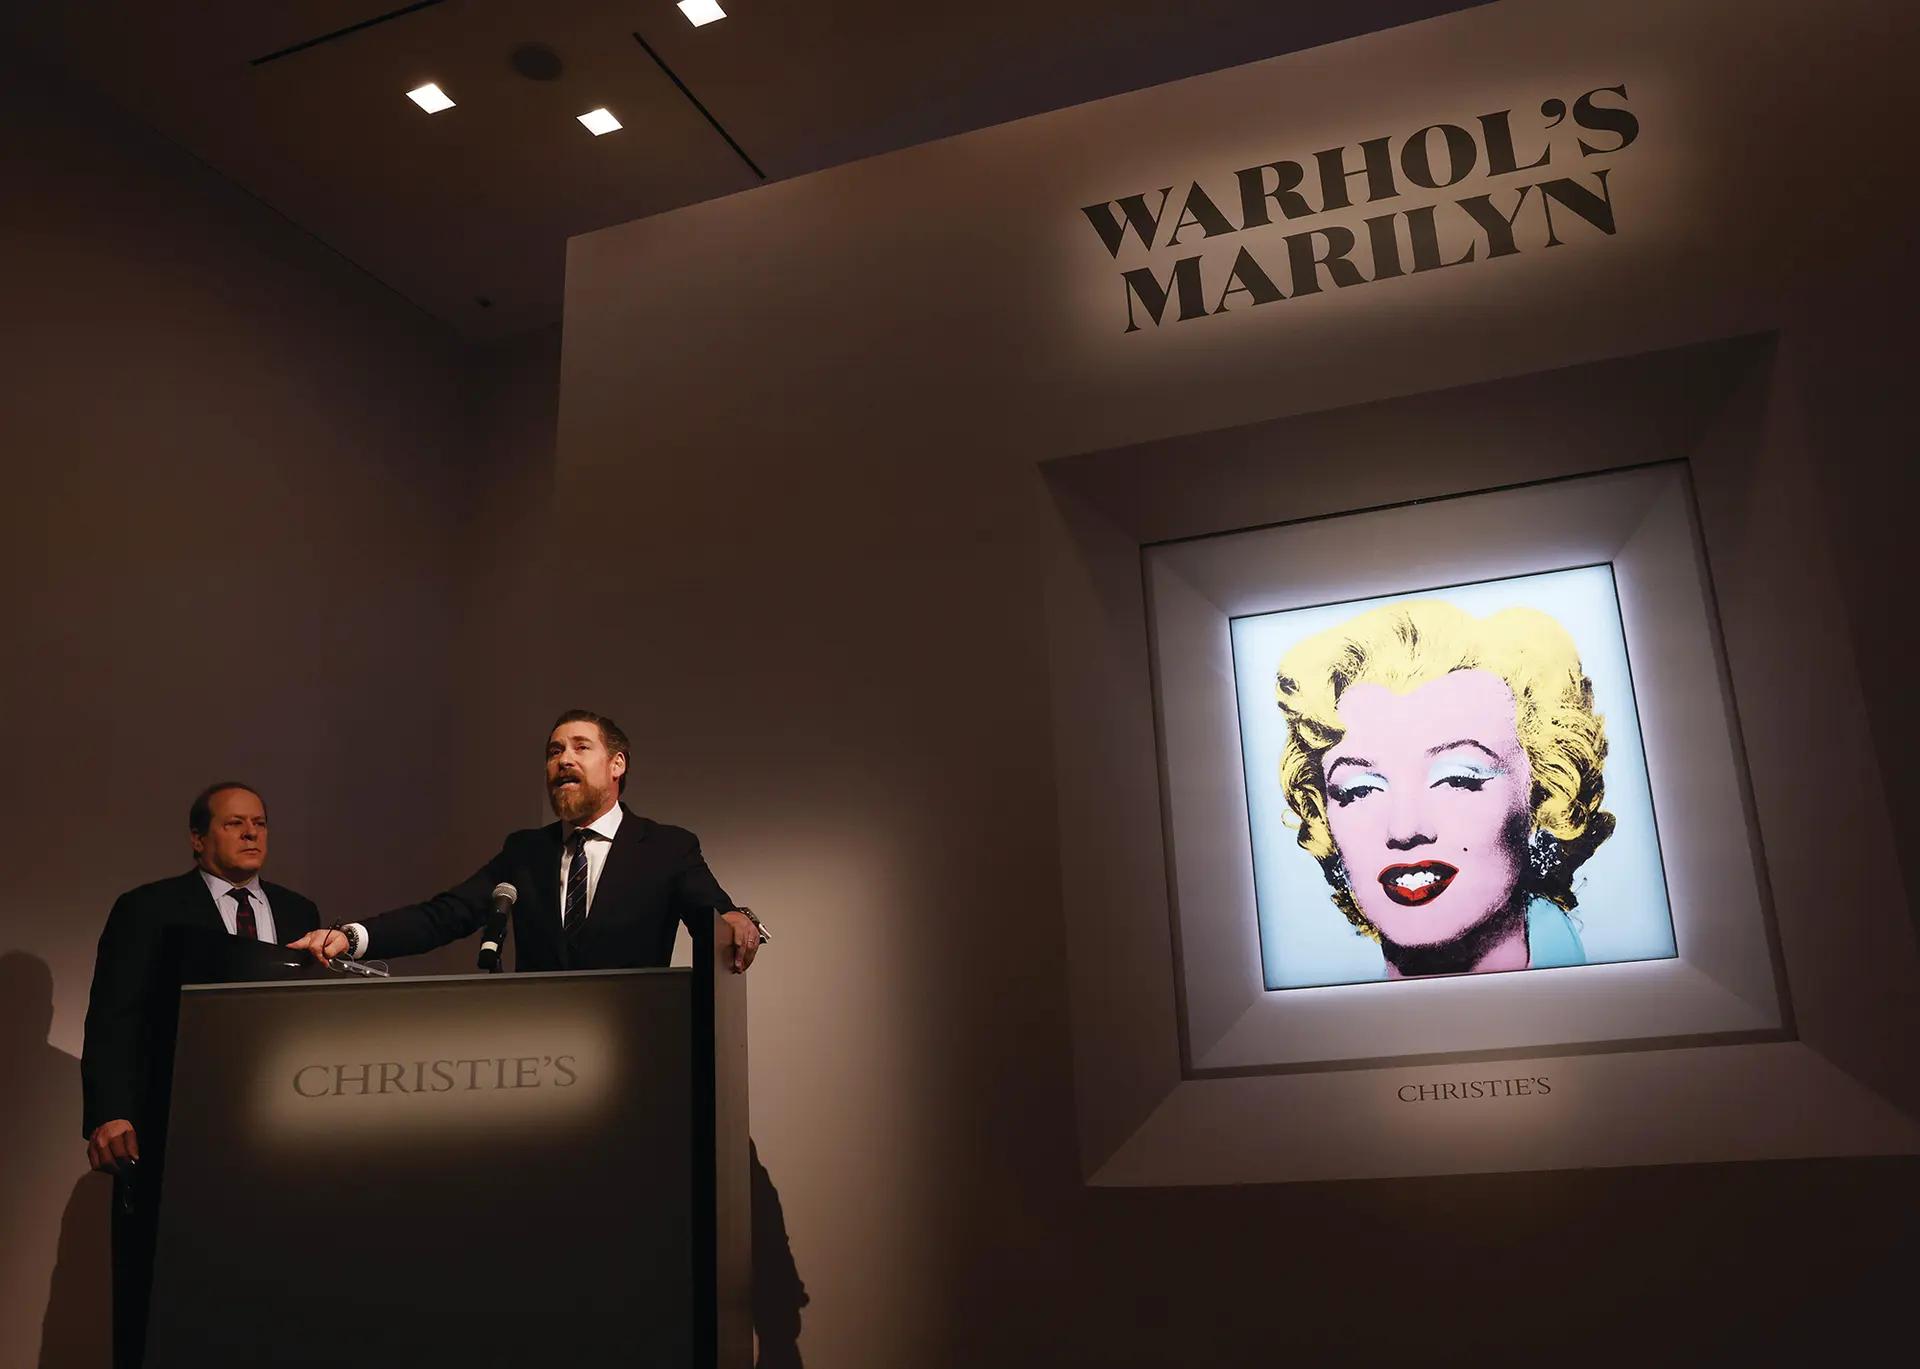 In May this year, Christie’s auctioned Andy Warhol’s 1964 Shot Sage Blue Marilyn. The price reached $195m, the highest auction price ever achieved for a 20th-century work, exceeding the $110.5m paid for Jean-Michel Basquiat’s Untitled (1982) UPI/Alamy Stock Photo